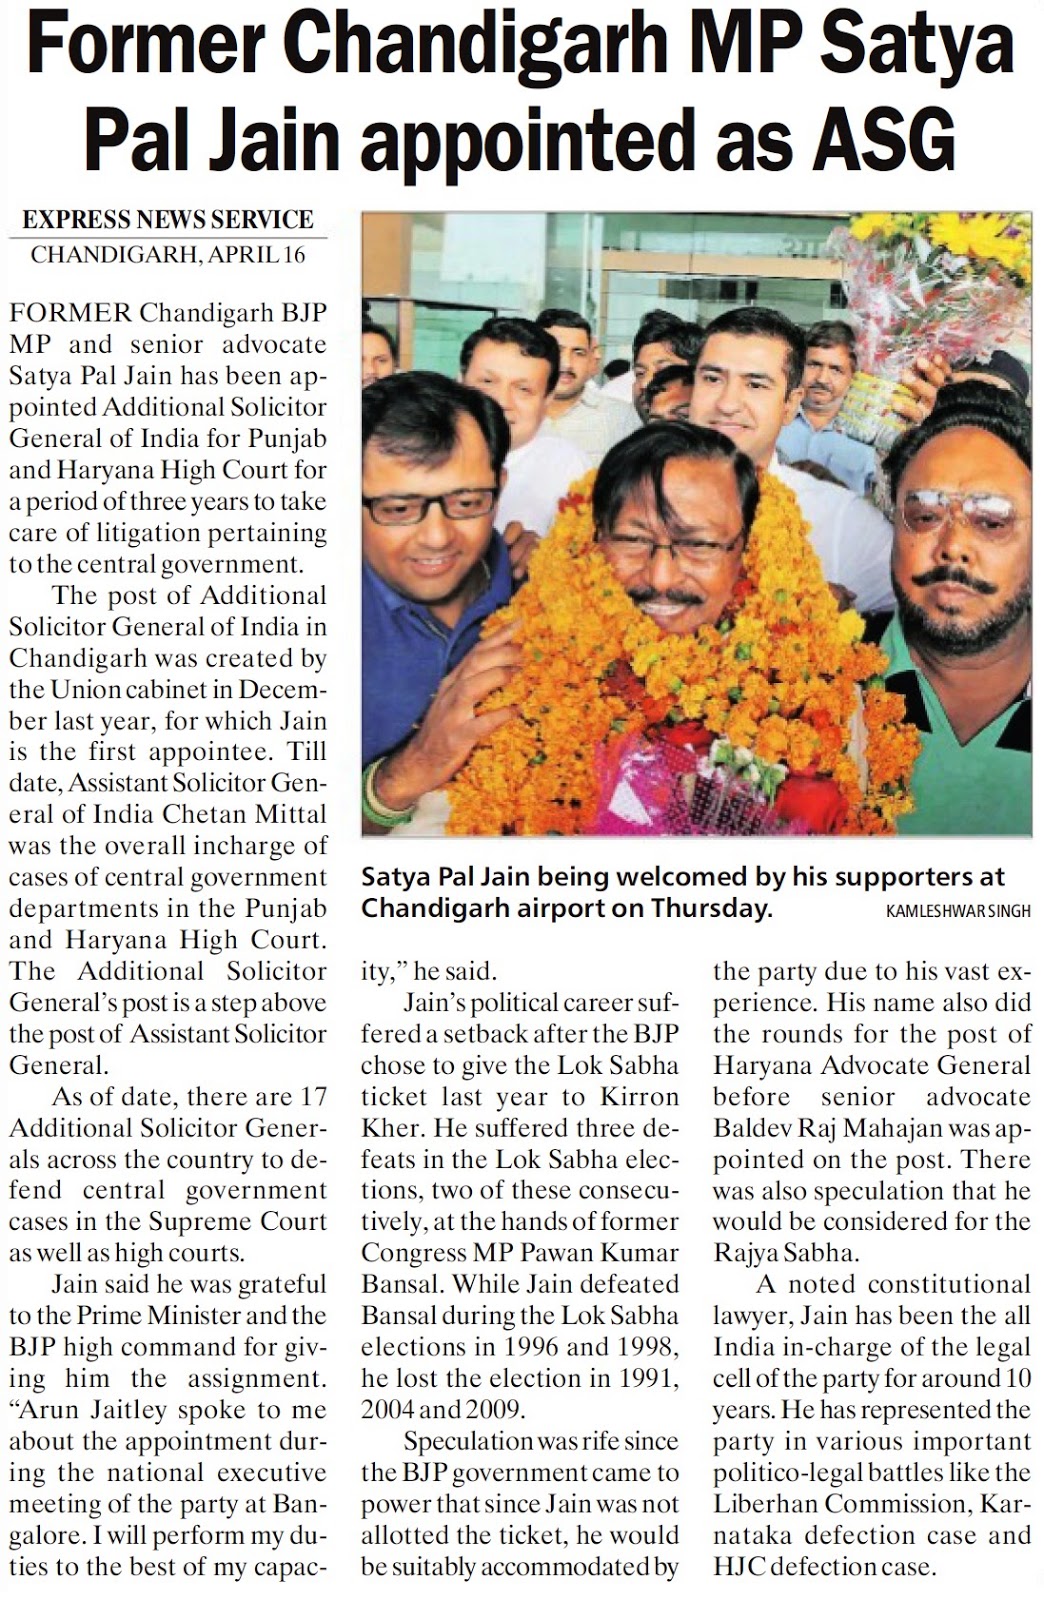 Satya Pal Jain being welcomed by his supporters at Chandigarh airport on Thursday.